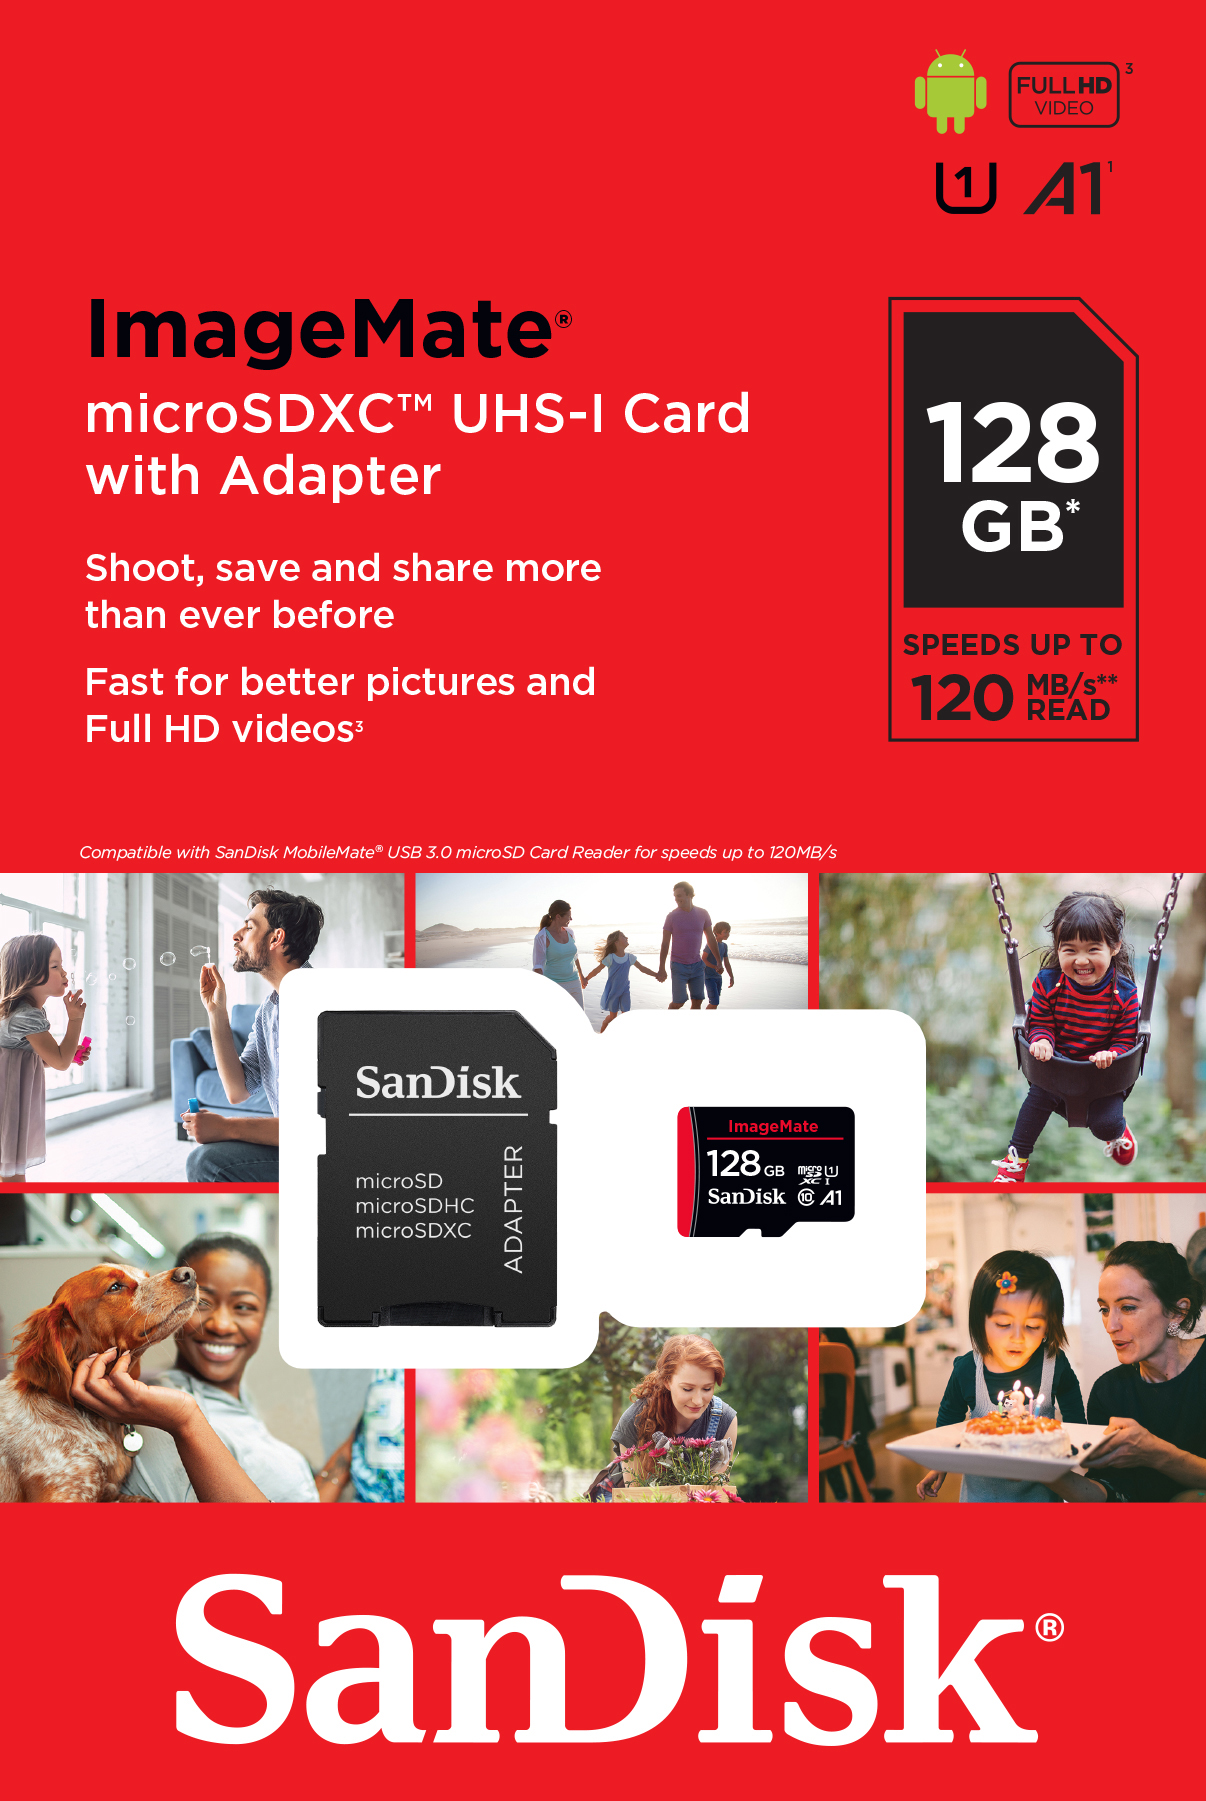 SanDisk 128 GB ImageMate microSDXC UHS-1 Memory Card with Adapter - C10, U1, Full HD, A1 Micro SD Card - image 3 of 5